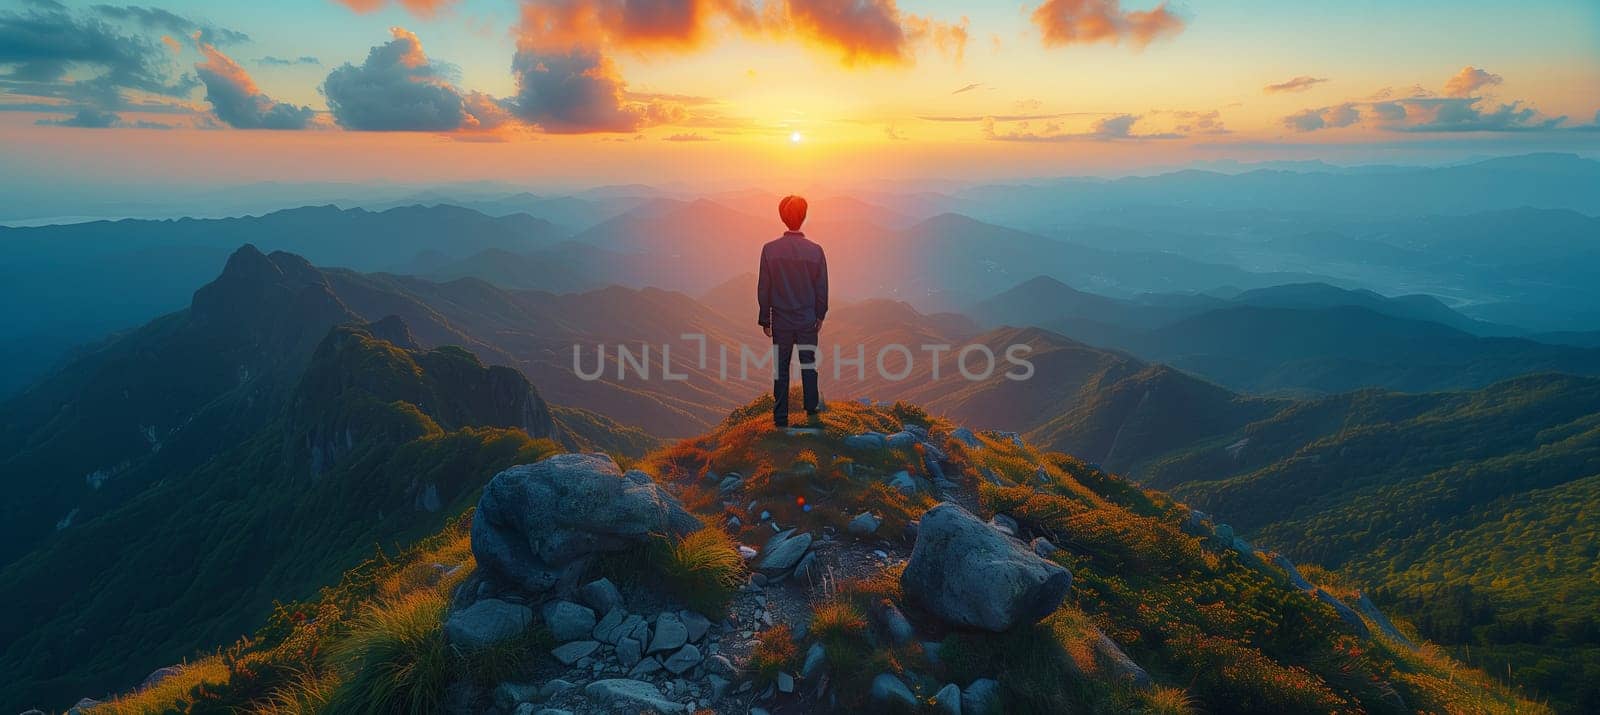 Man standing on mountain at dusk, surrounded by stunning natural landscape by richwolf